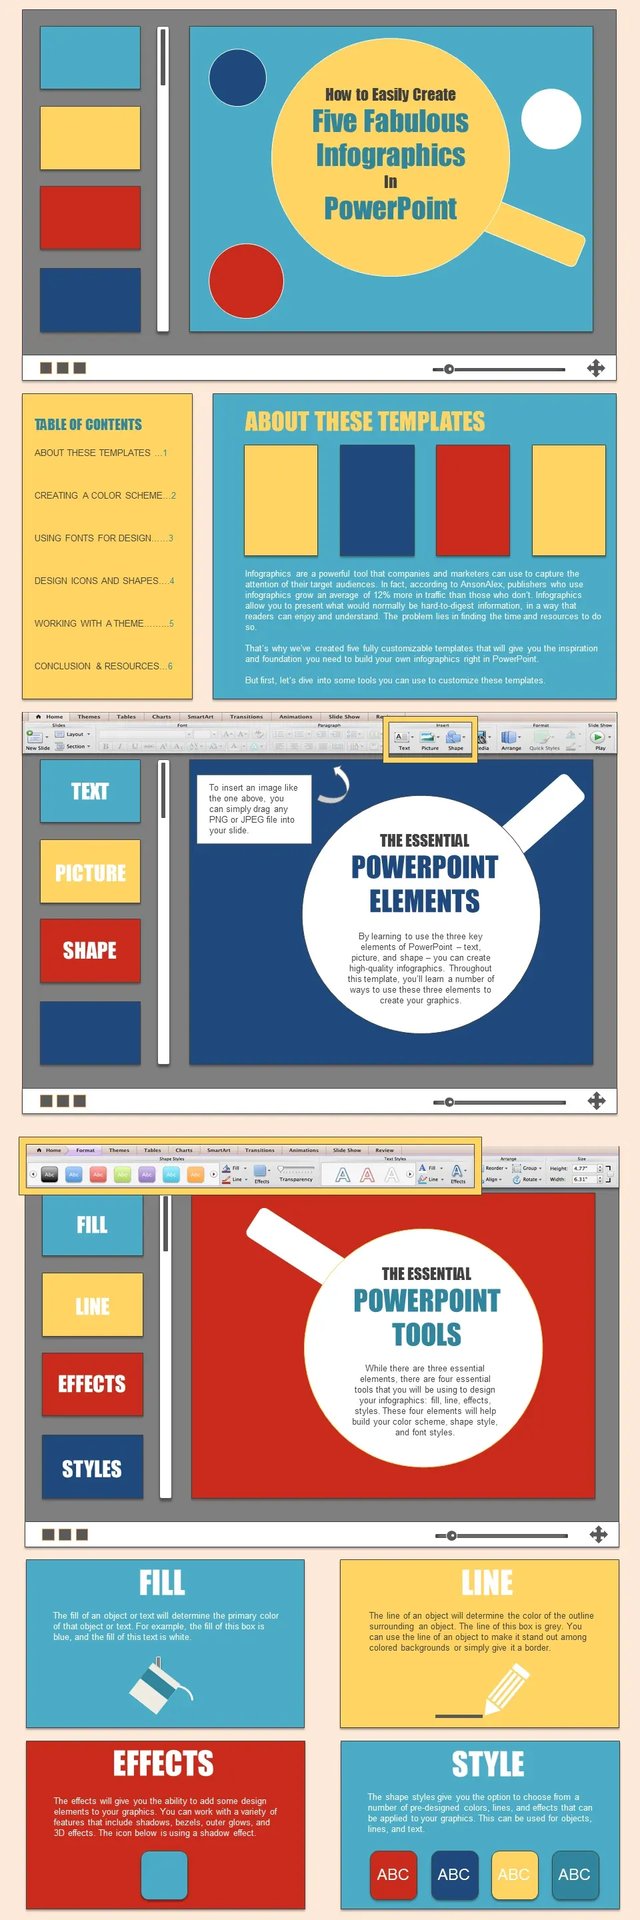 hubspot-powerpoint-infographic-about-creating-infographics